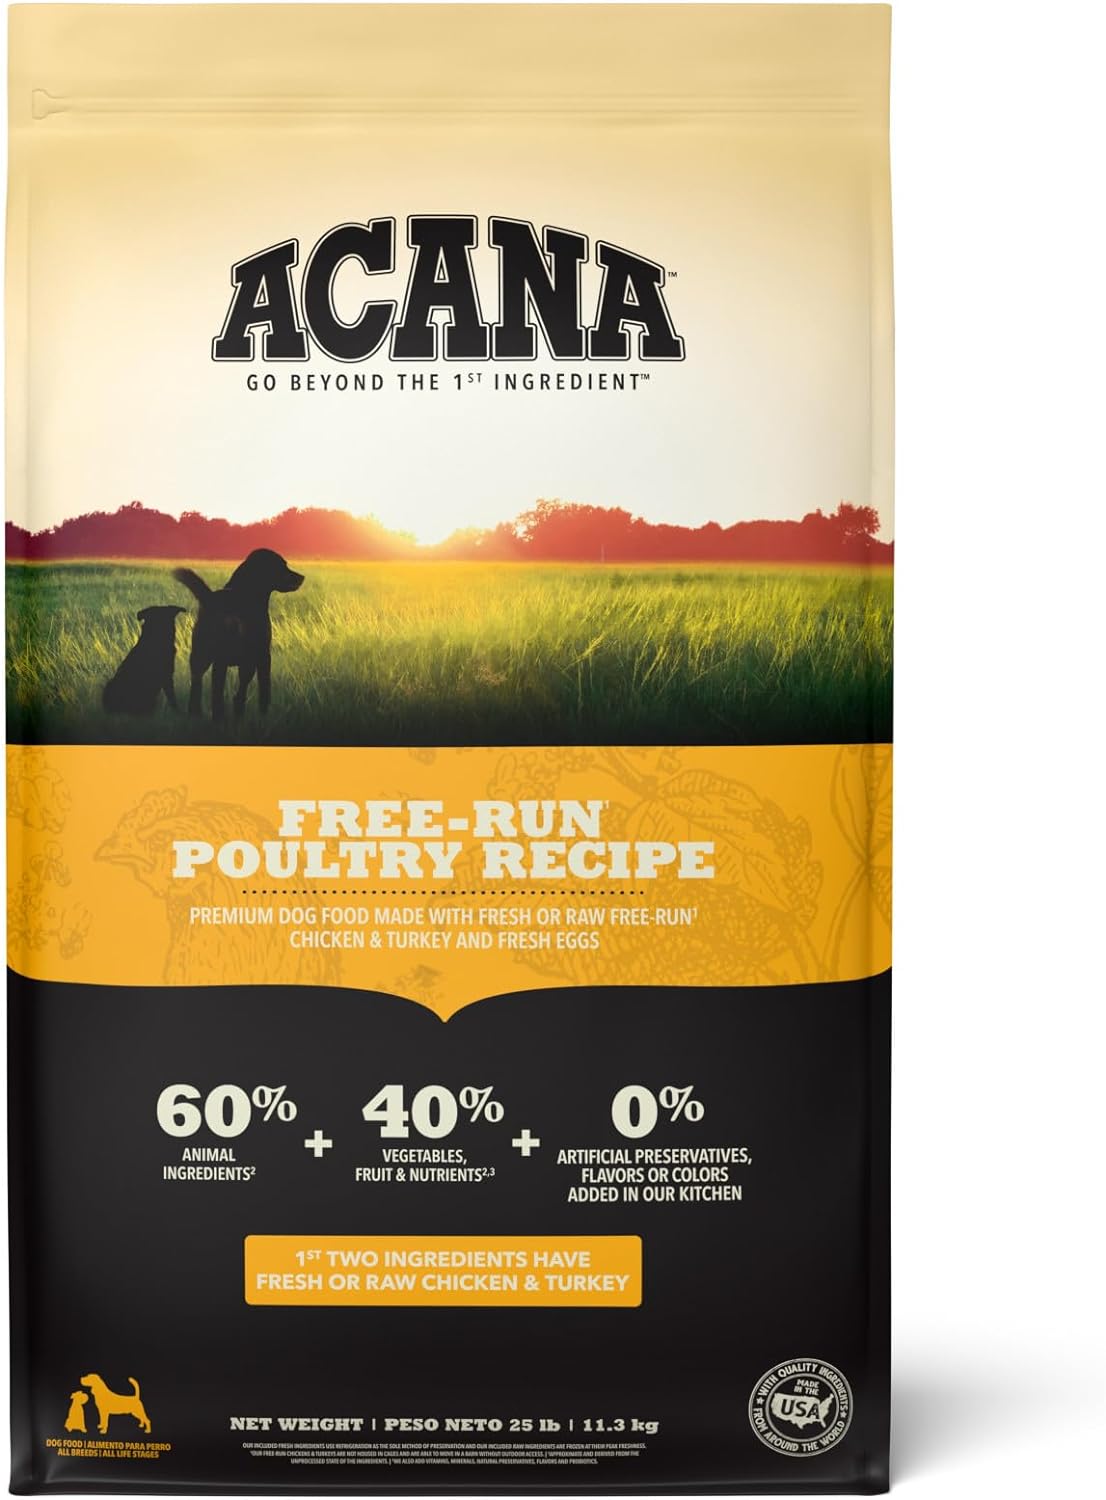 Acana Free-Run Poultry Recipe Dry Dog Food – Featured Image